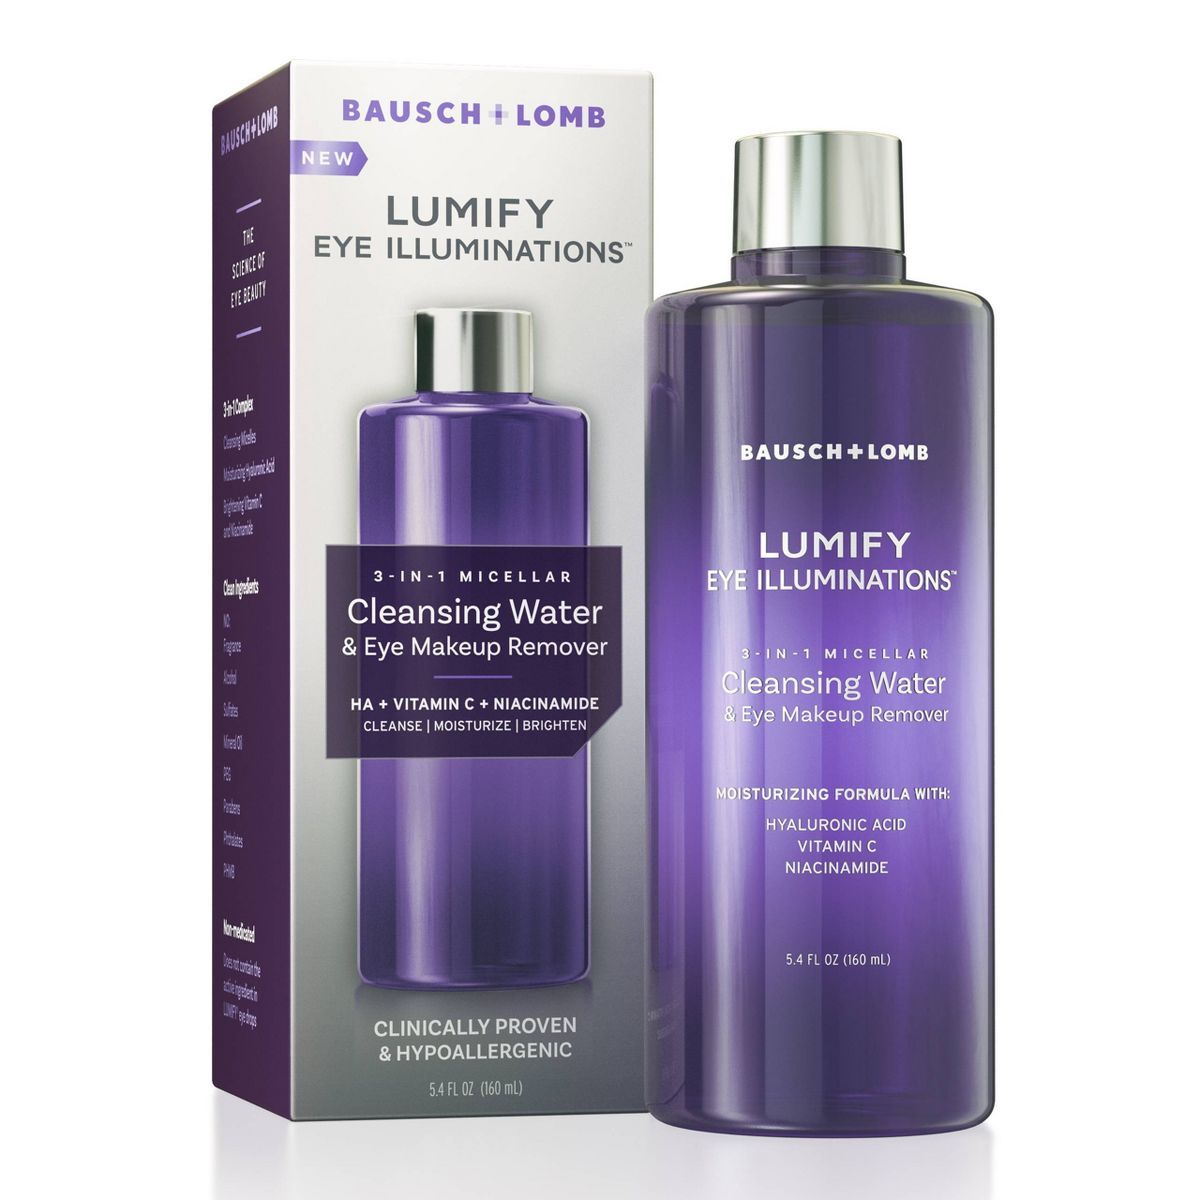 Lumify Eye Illuminations Makeup Remover & Cleanser - 5.4 fl oz | Target